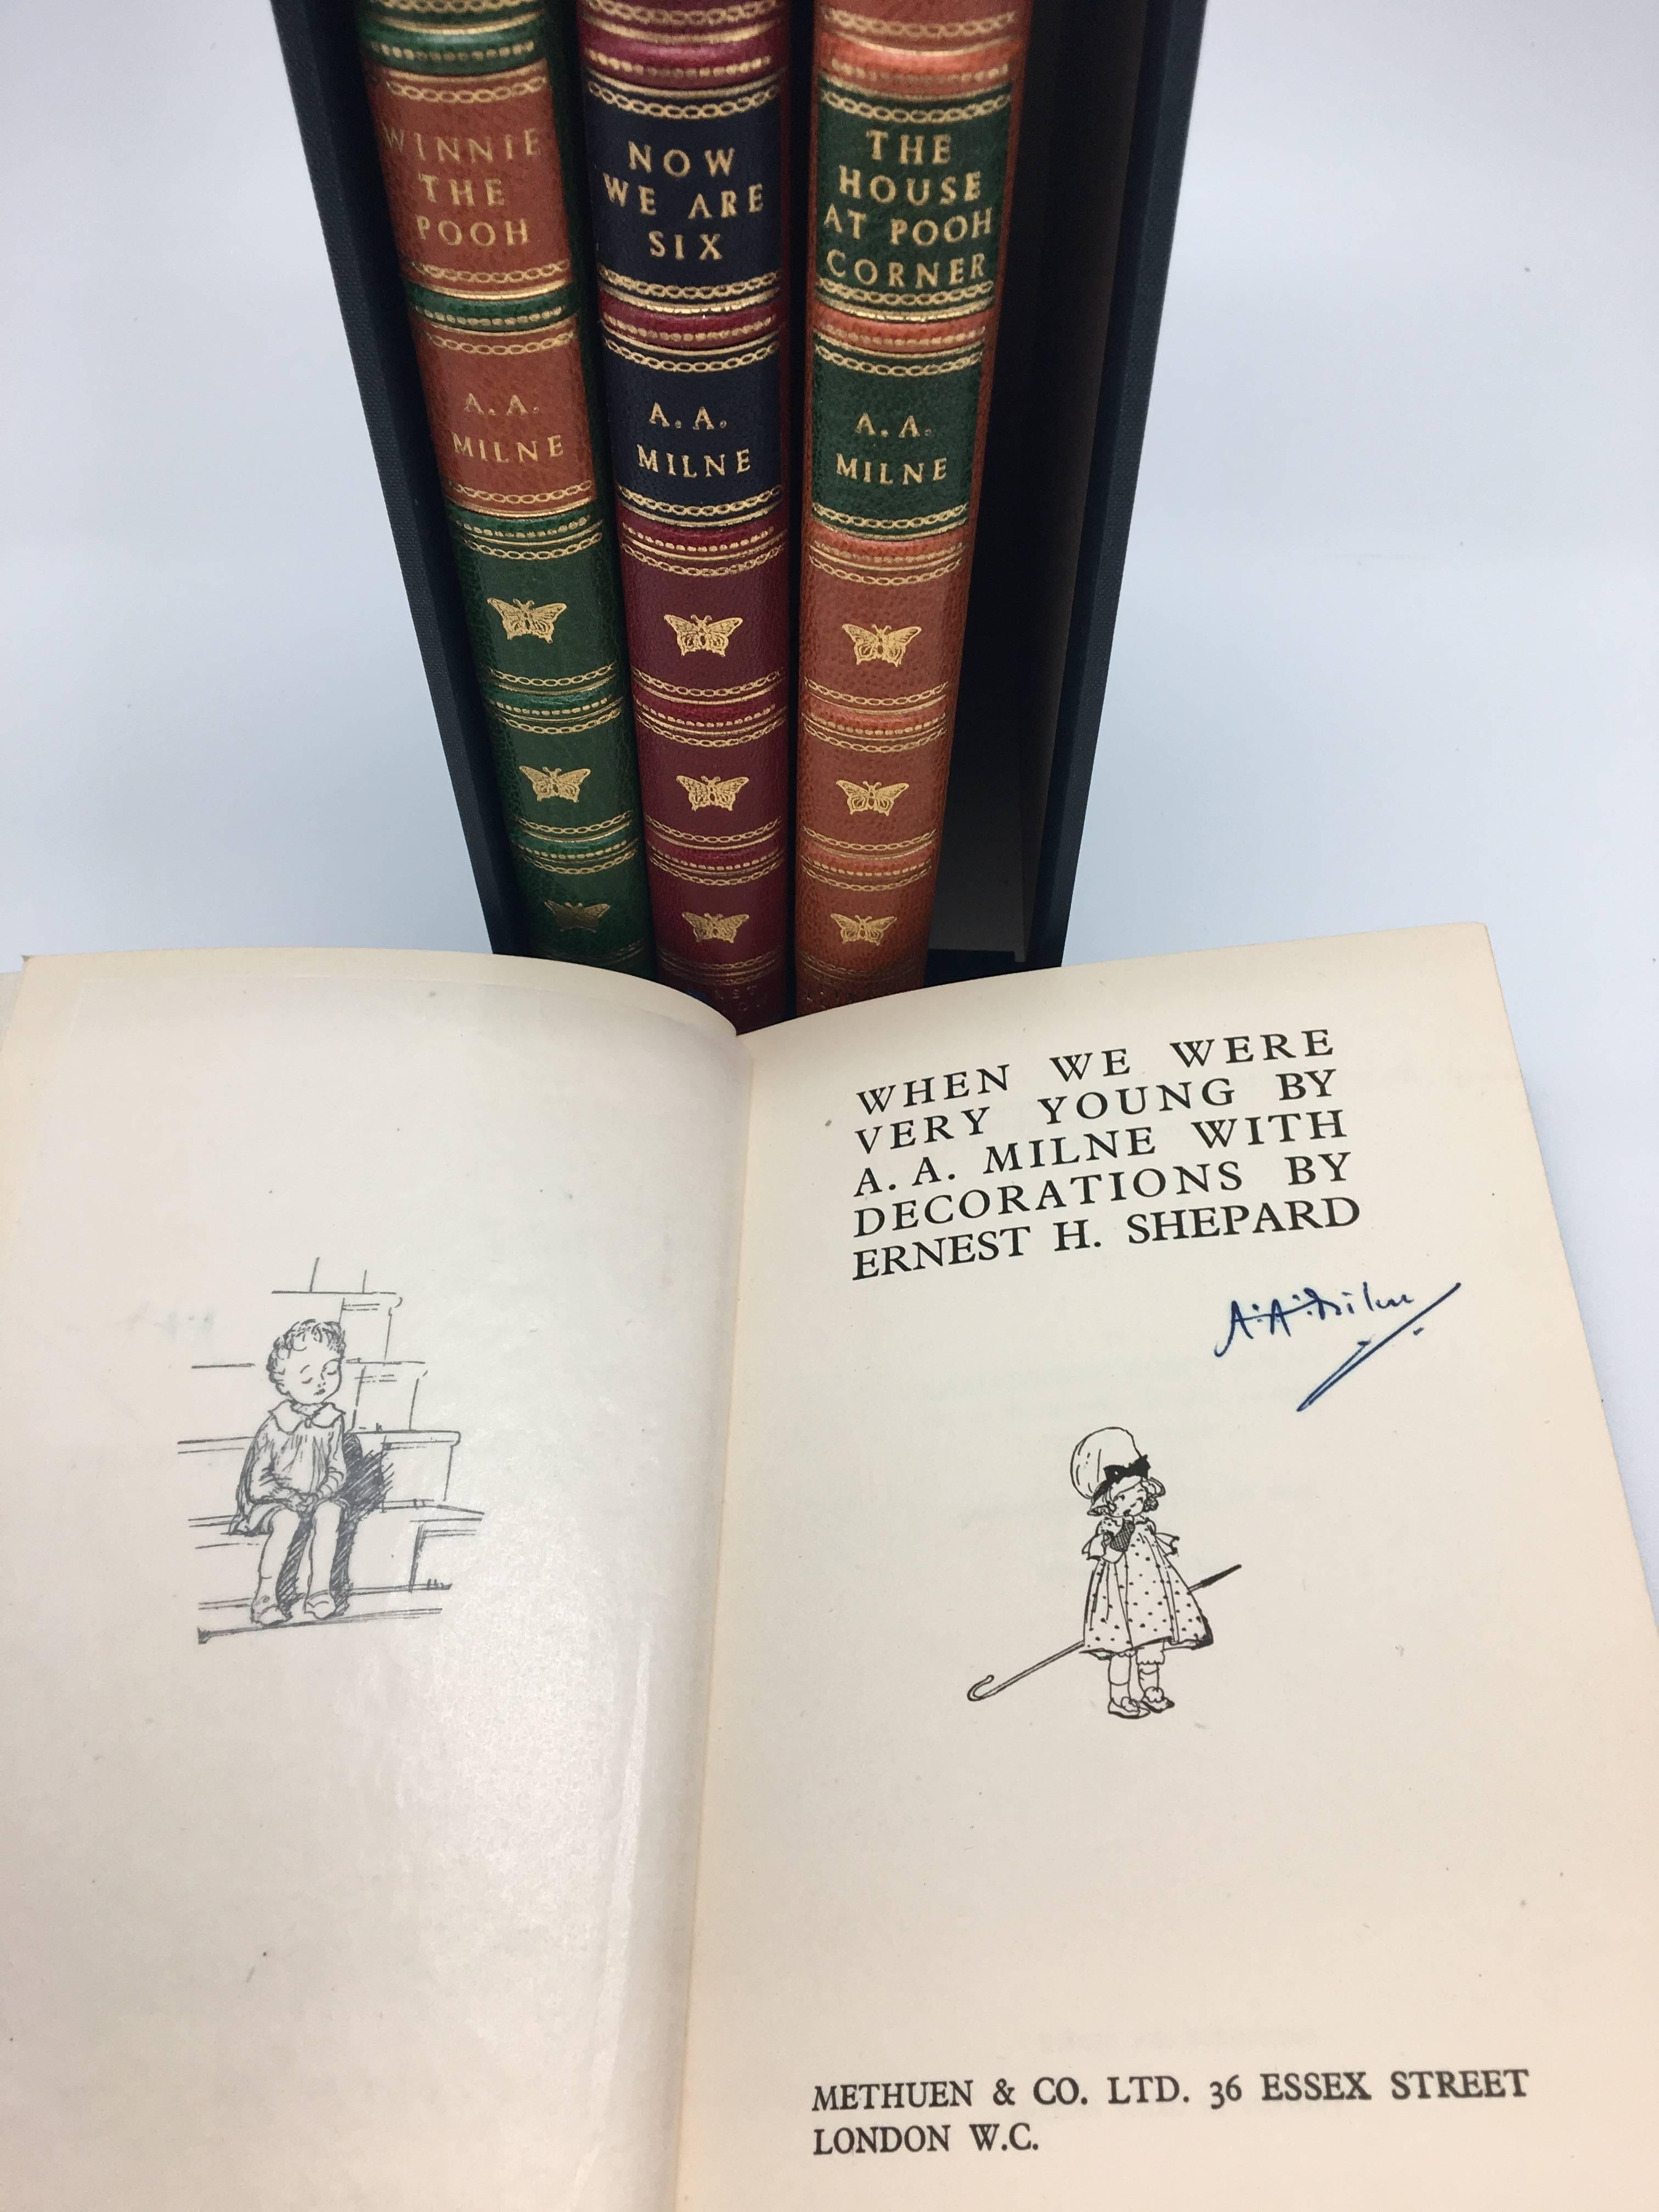 This is a complete leather bound set of A. A. Milne's Classic children's books based on the adventures of Christopher Robin and Winnie the Pooh. 

These four volumes are illustrated throughout by Ernest H. Shepard and are bound in beautiful full